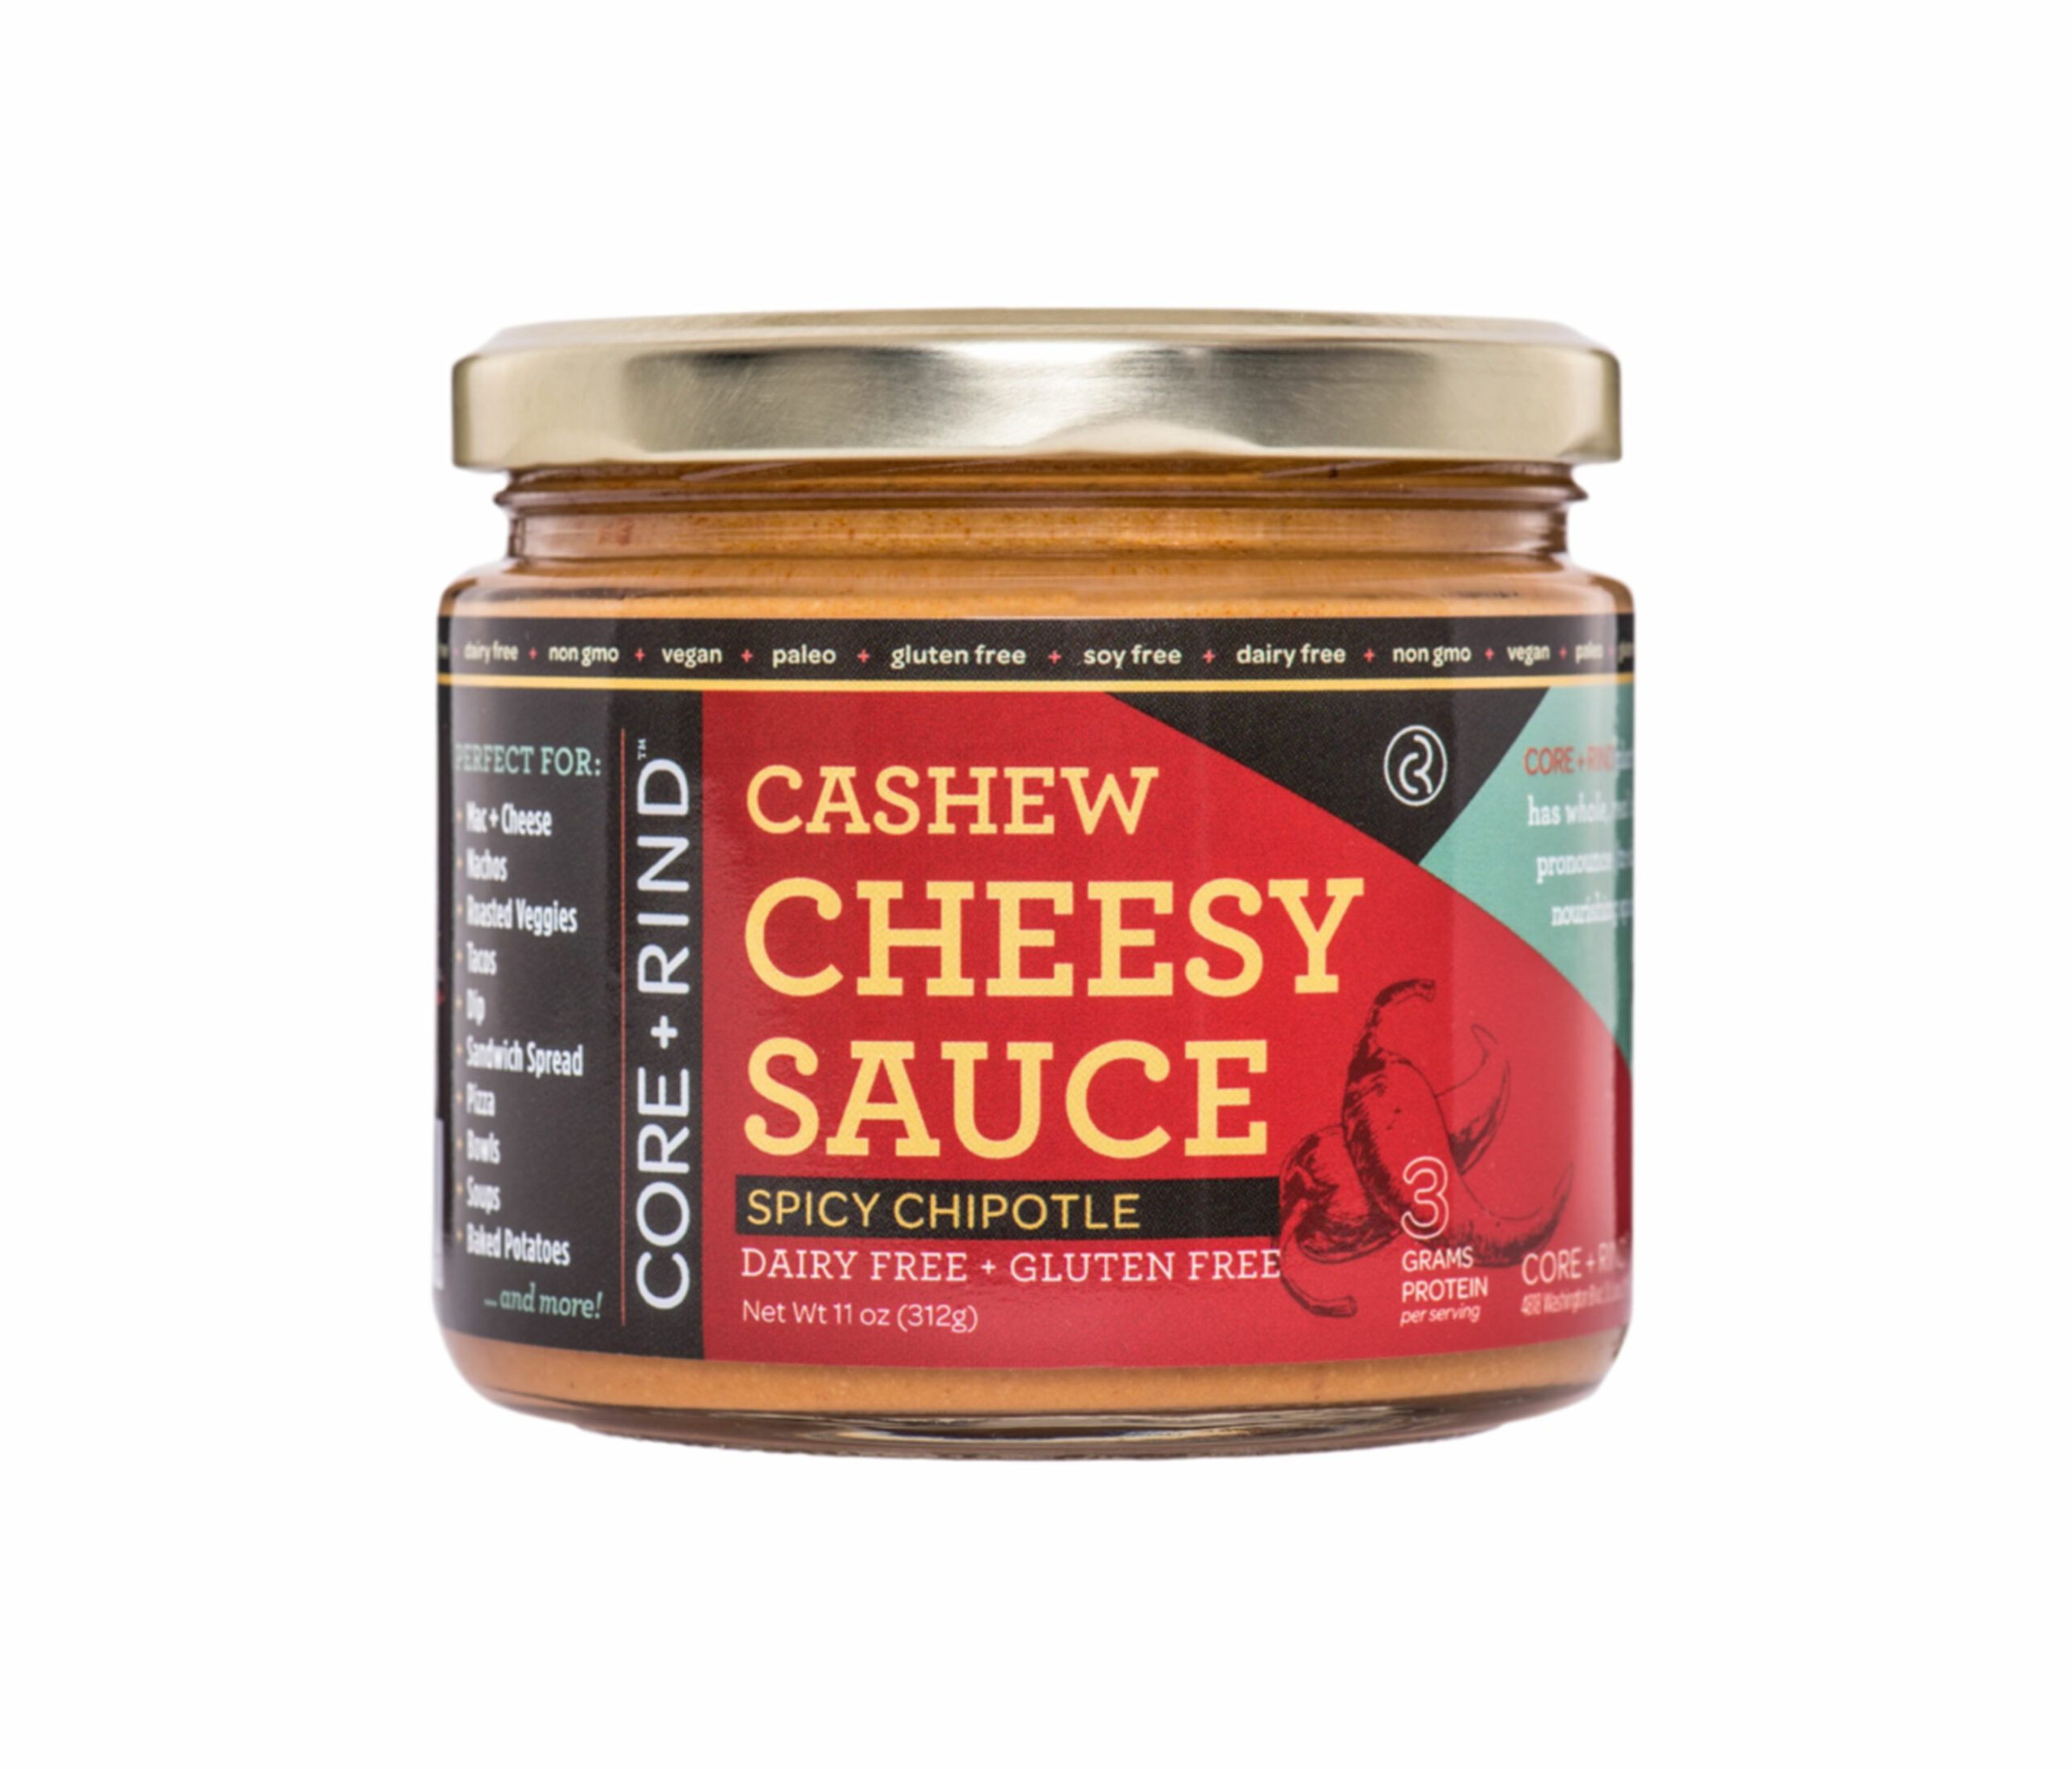 Cashew Cheesy Sauce (Spicy Chipotle) by Core + Rind